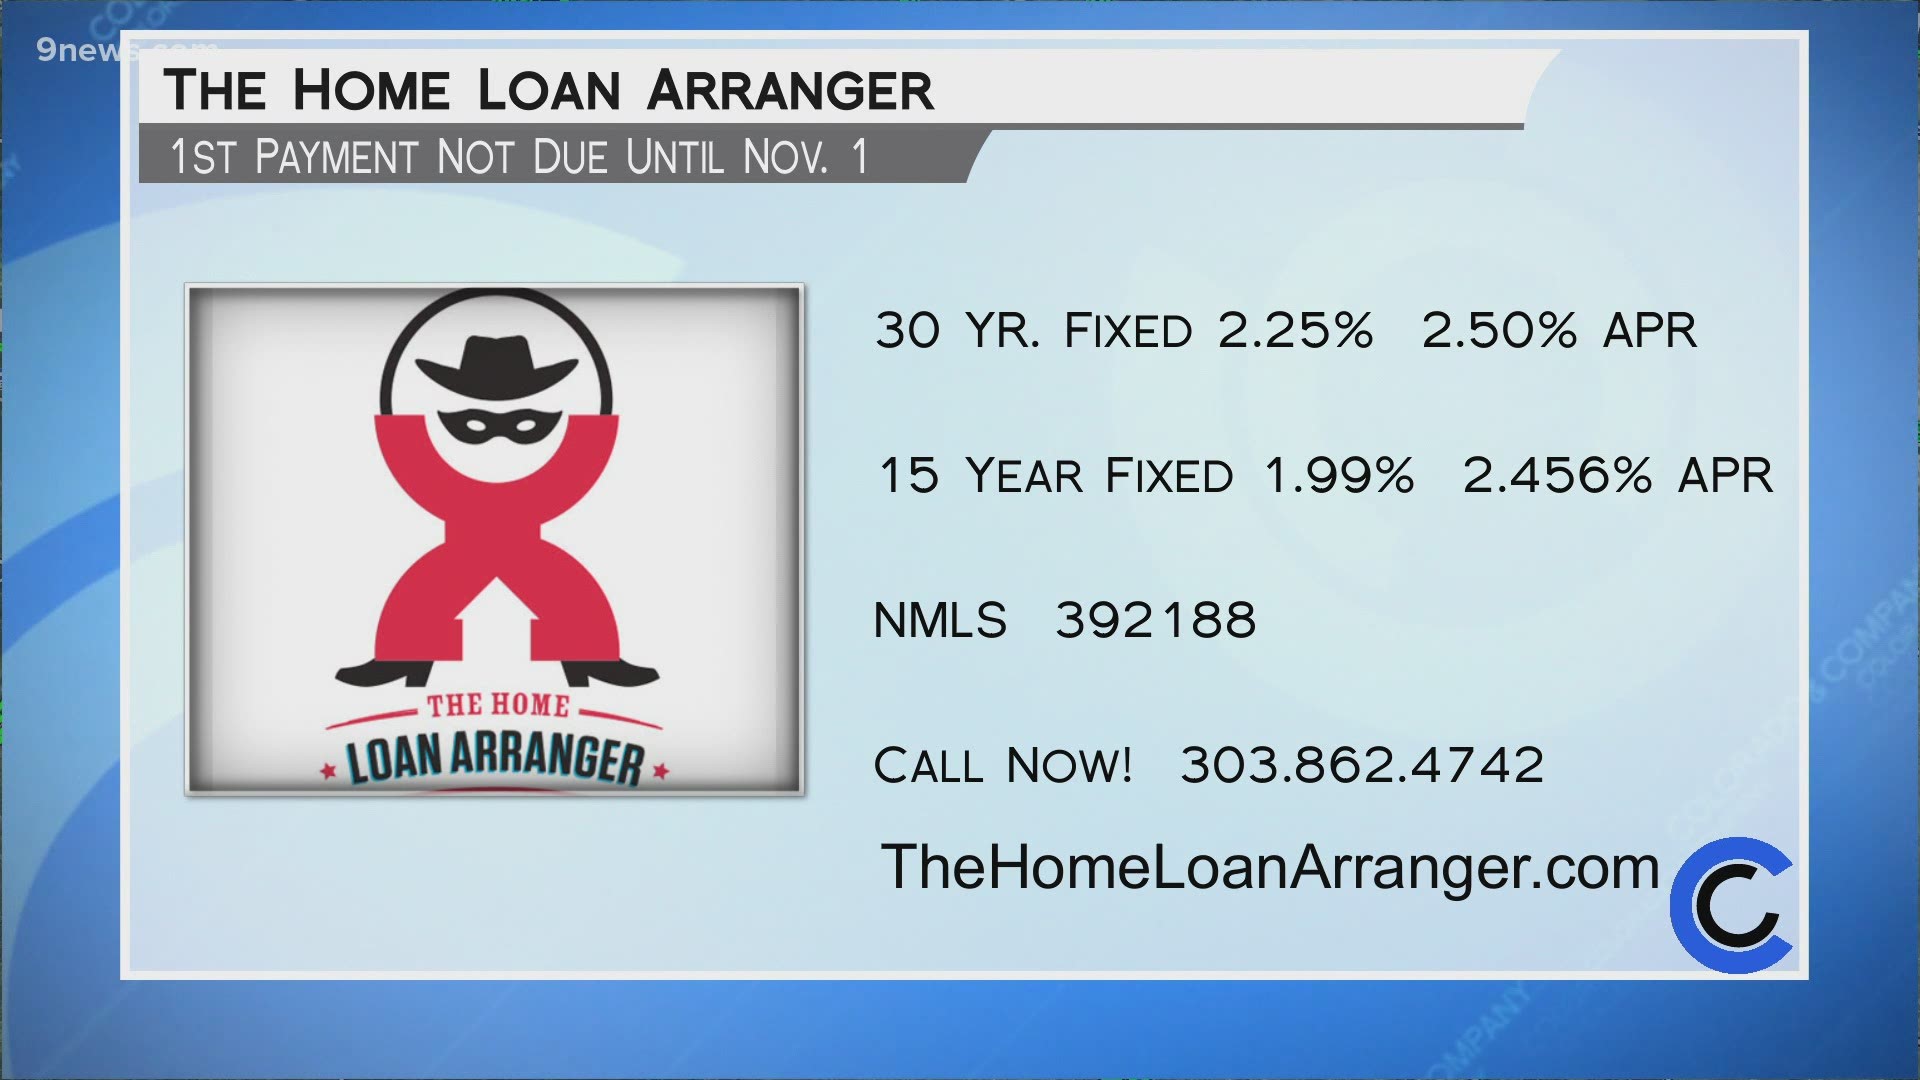 Call the Home Loan Arranger at 303.862.4742 to get started now. Your first payment won't be due until November! Learn more at TheHomeLoanArranger.com.